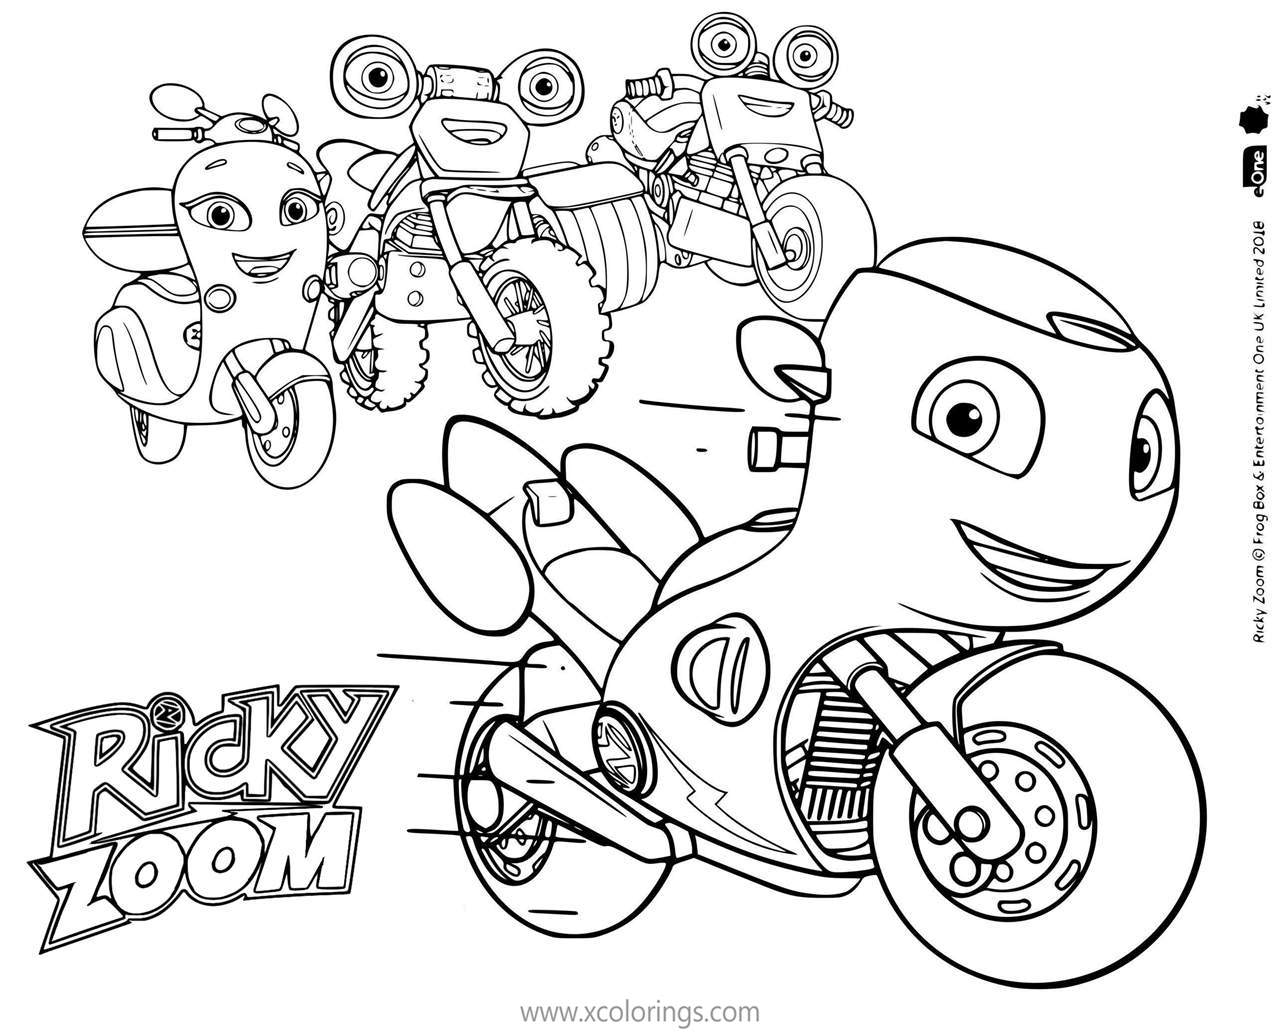 Free Ricky Zoom Coloring Pages Motorcycle and Friends printable